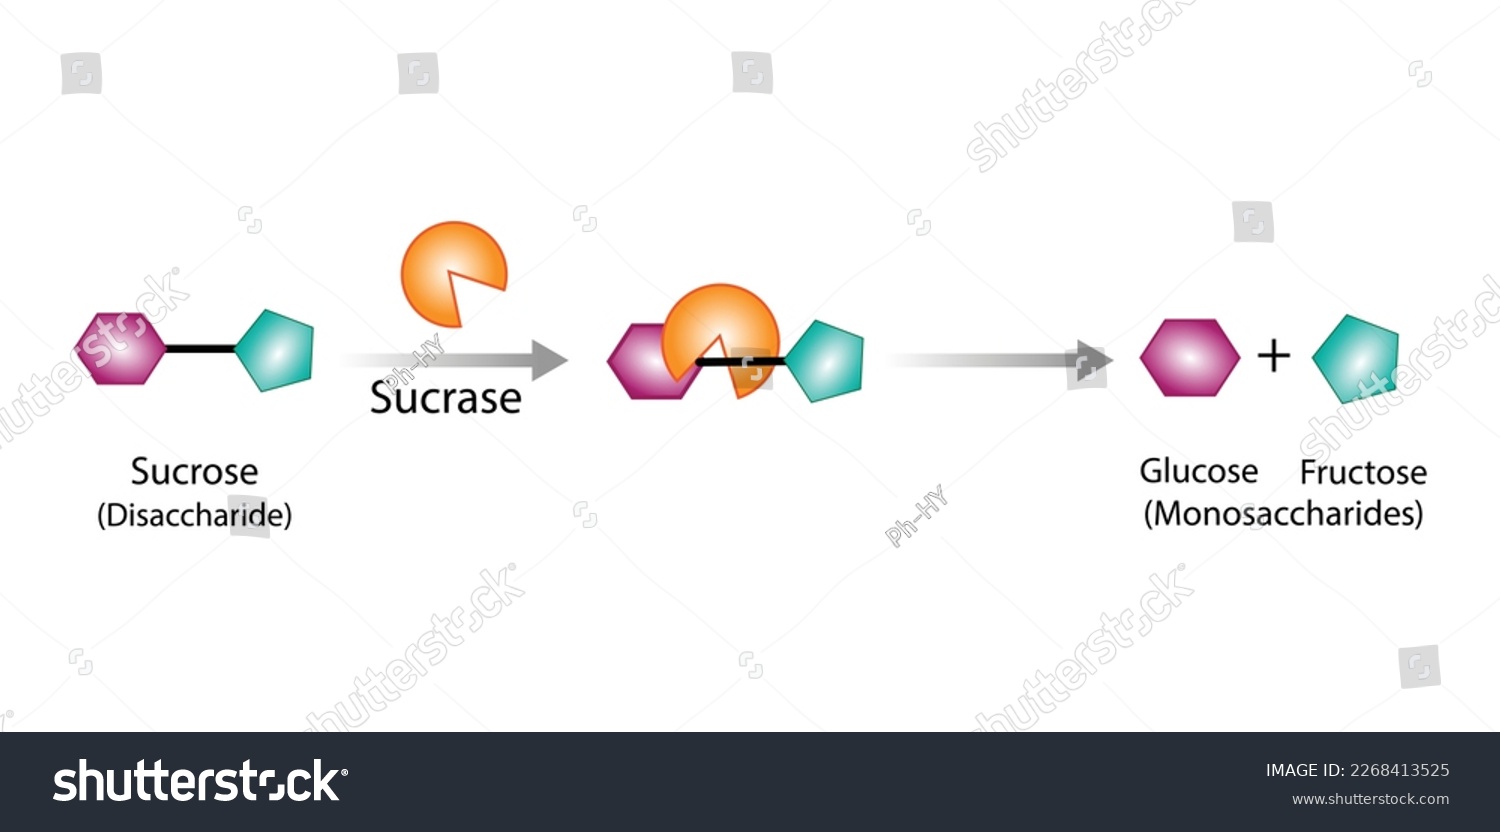 SVG of Sucrose digestion. Carbohydrates Digestion.  Sucrase Enzymes catalyze Disaccharide sucrose Molecule to glucose and fructose. Glucose Sugar Formation. Scientific Diagram. Vector Illustration. svg